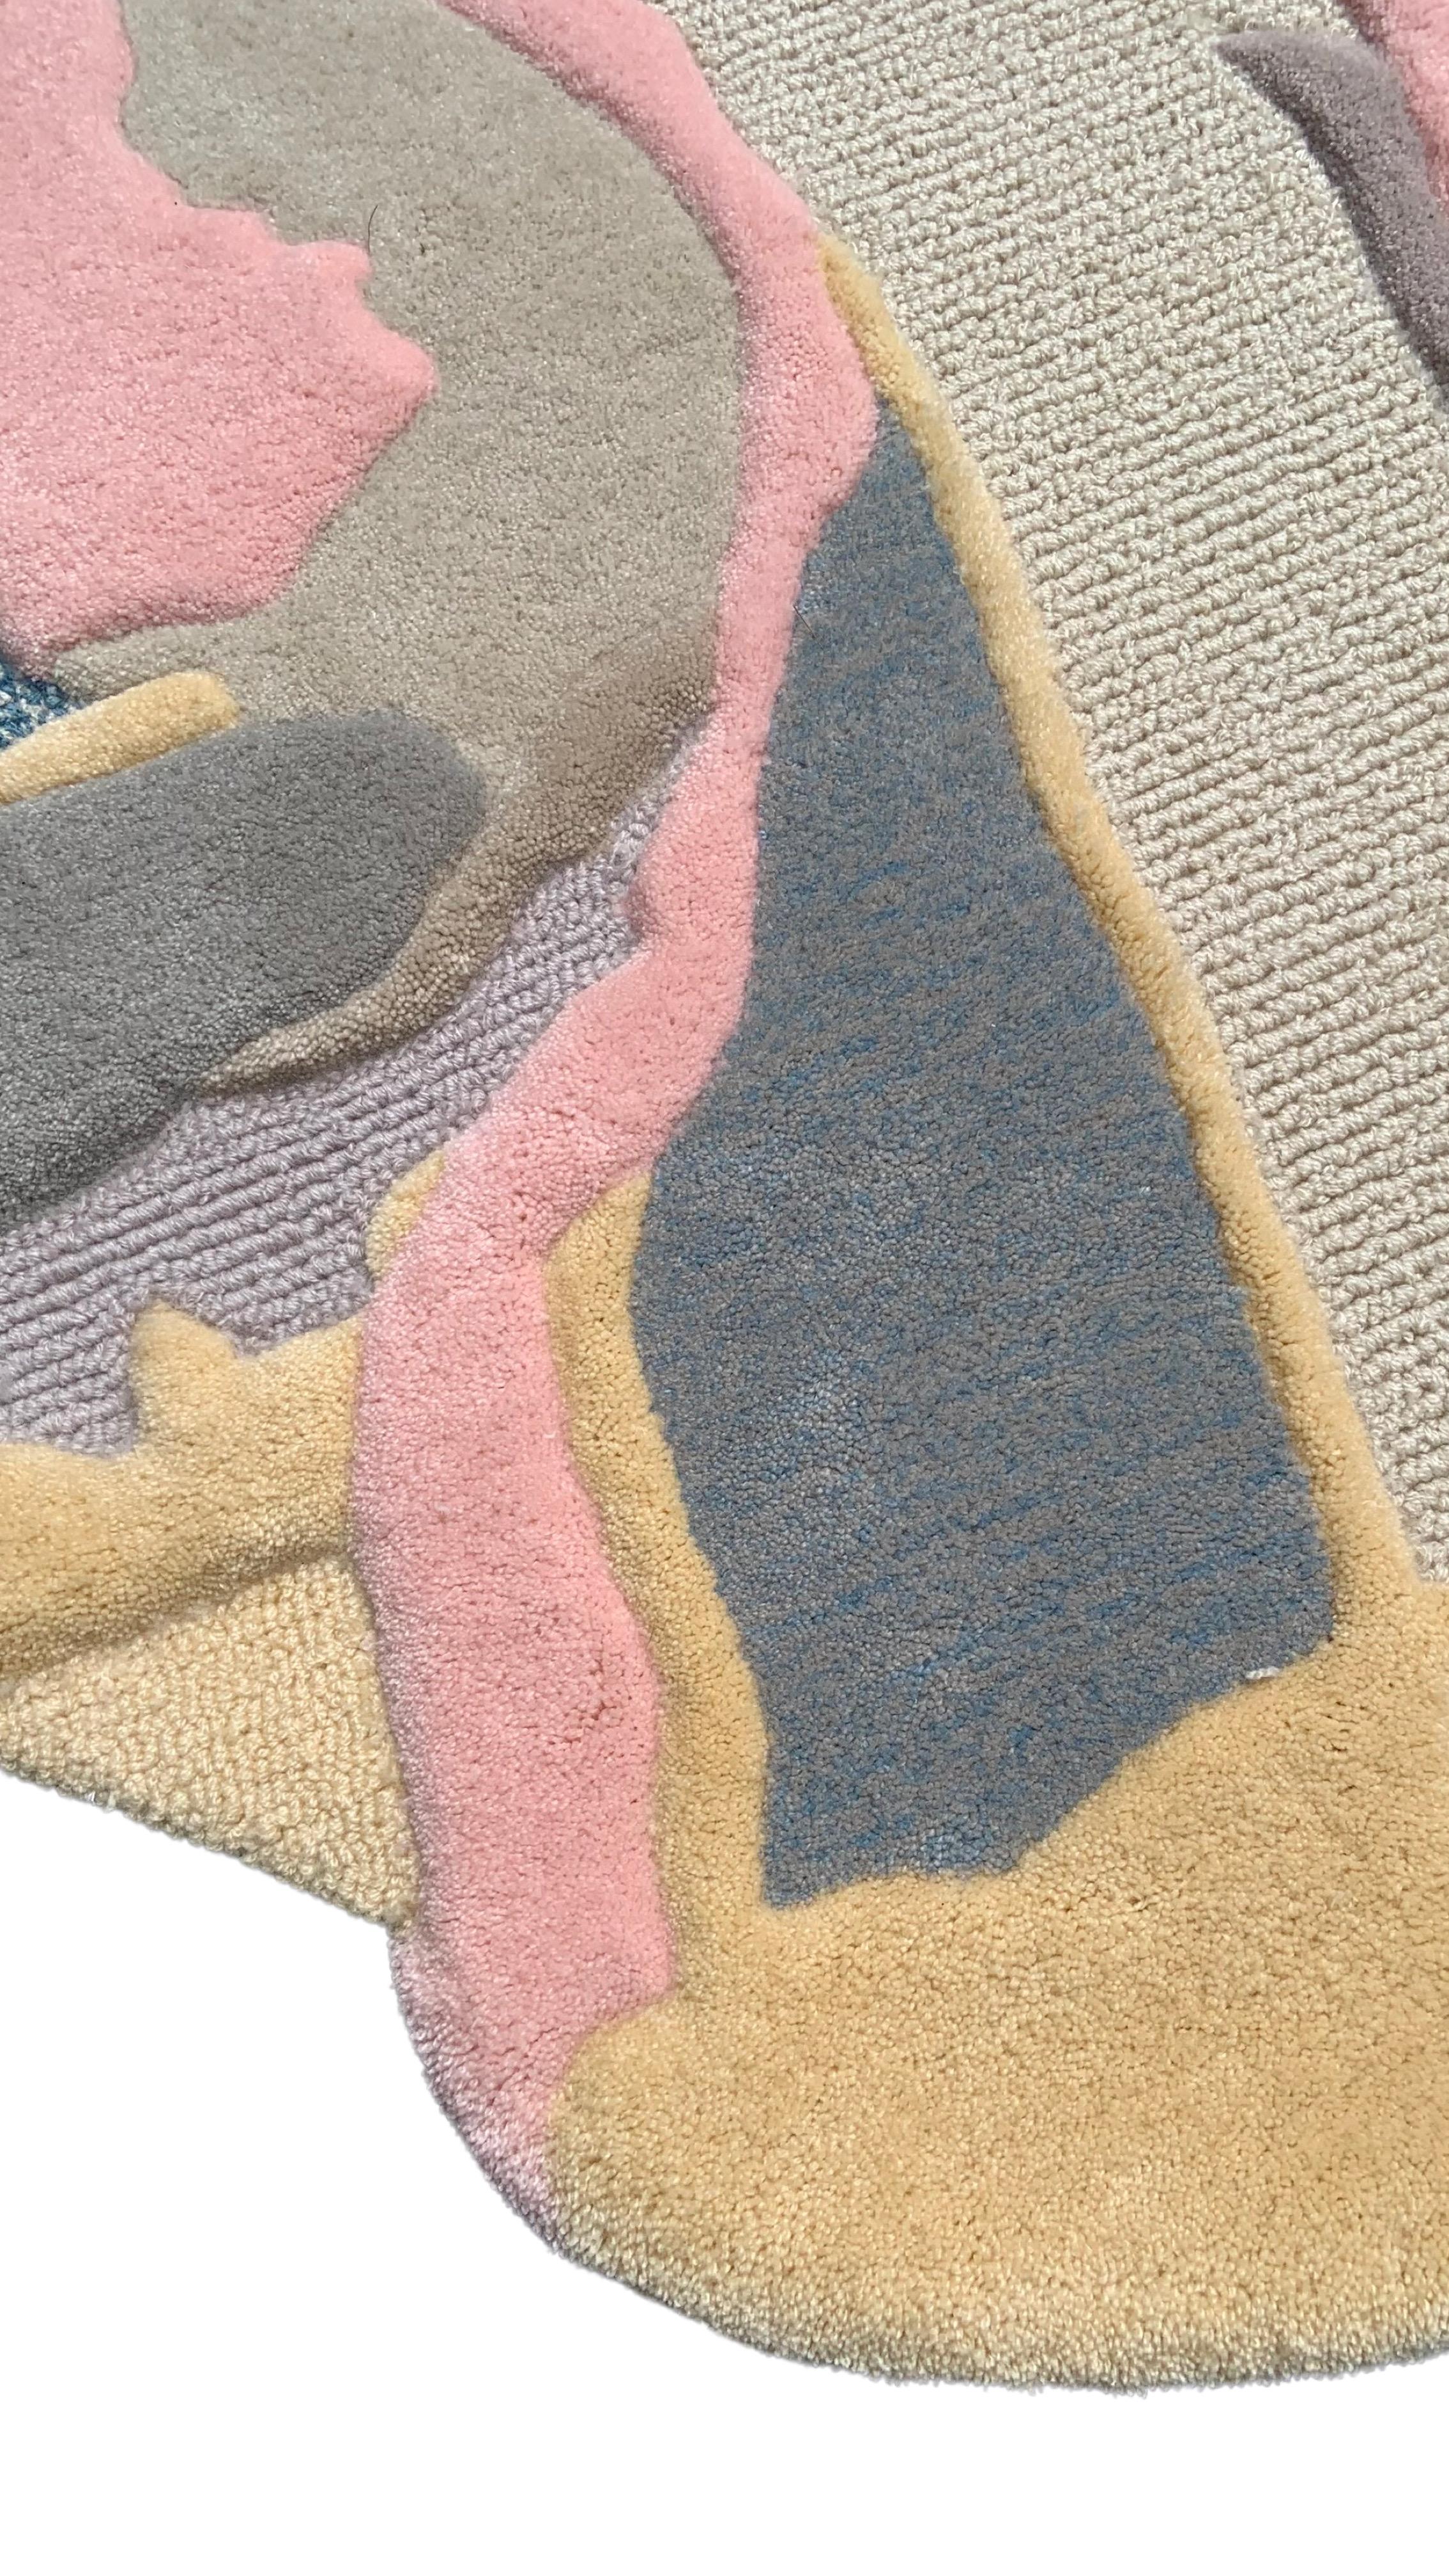 Pink opaque

To fly away like a kite in the sky? Ain't that the fantasy. To have a piece of said fantasy in technicolor? This rug will fulfil that dream to your imagination - and your space.

Original designed by Rannisa Soraya RAG Home